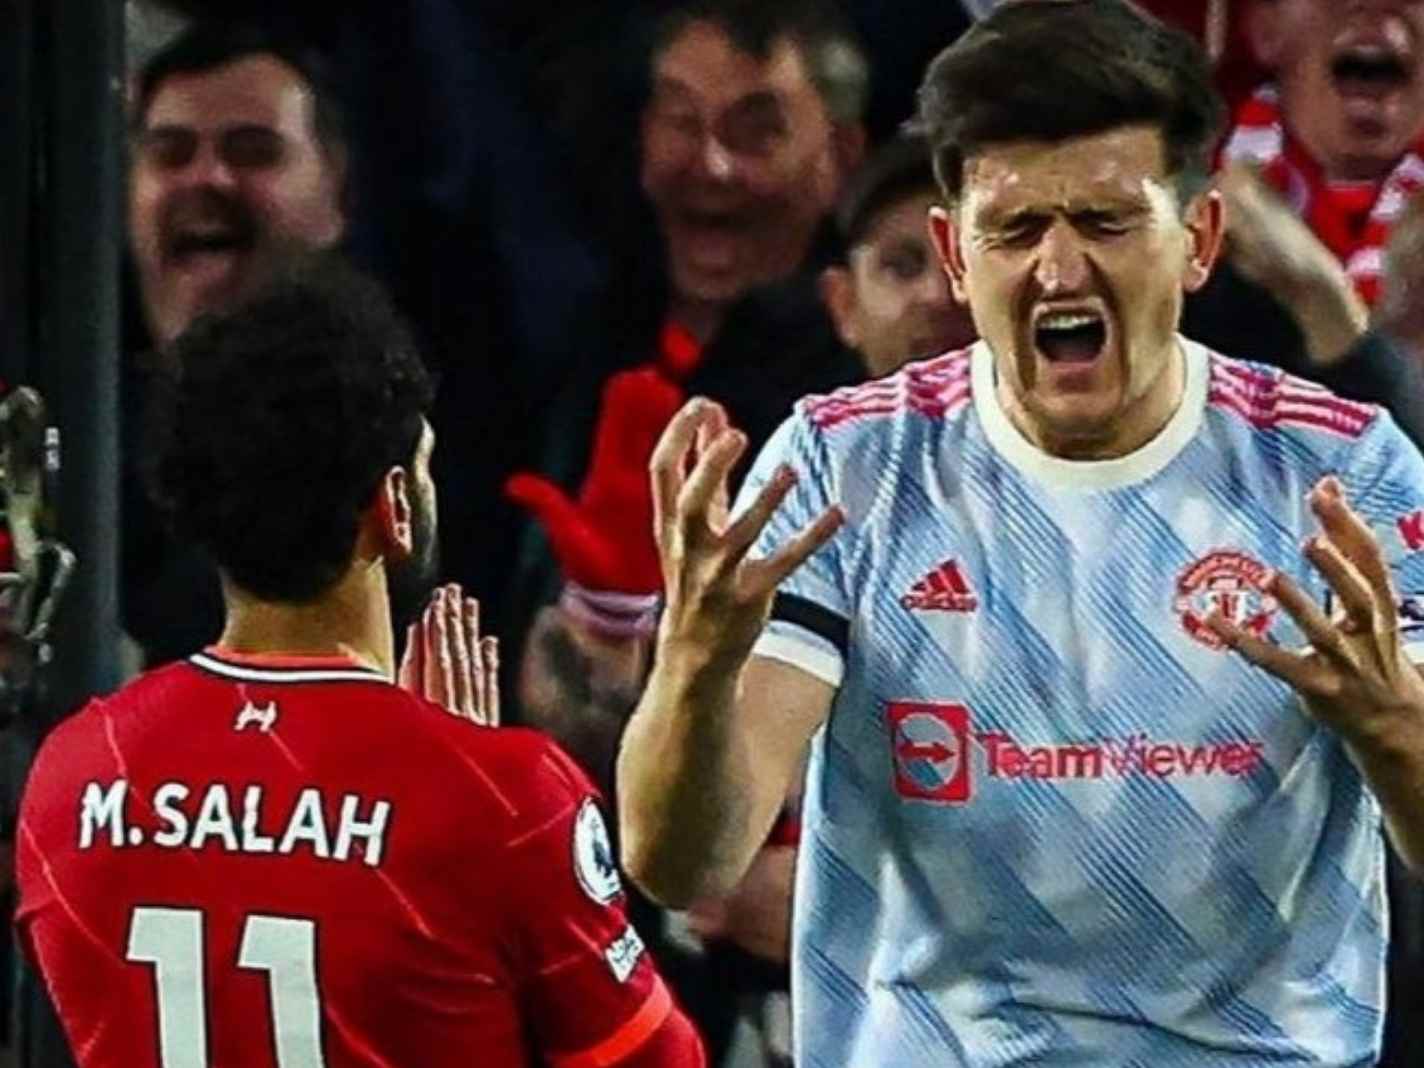 Mohamed Salah celebrates with tree pose as Harry Maguire rages in background 